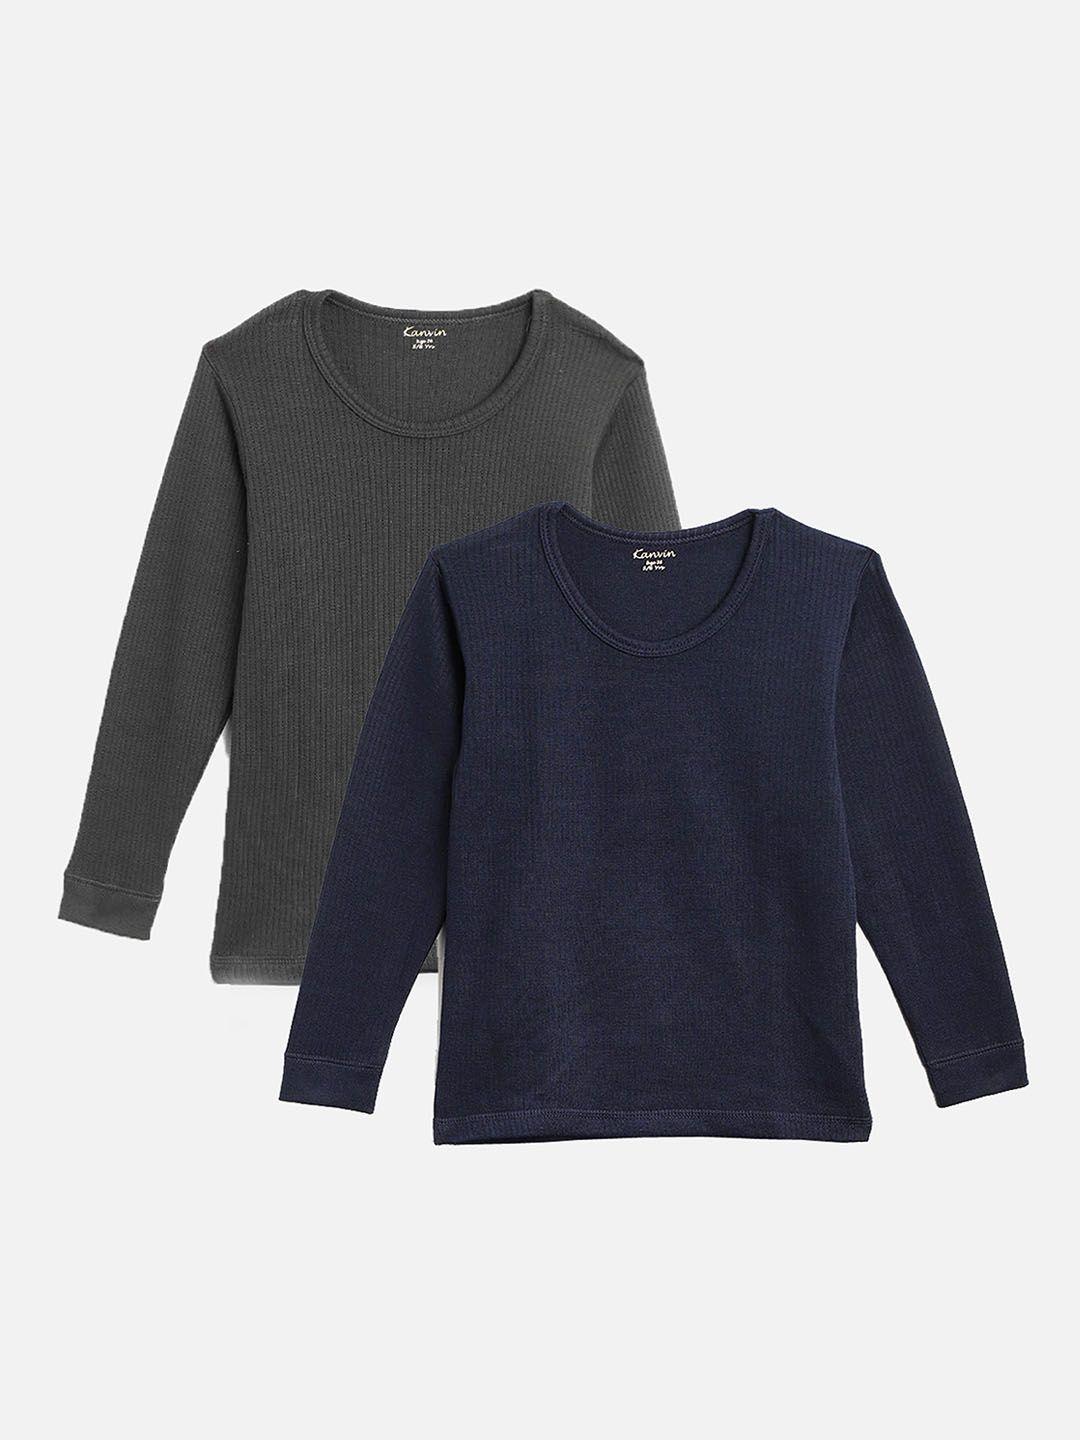 kanvin boys navy blue & charcoal pack of 2 solid thermal tops